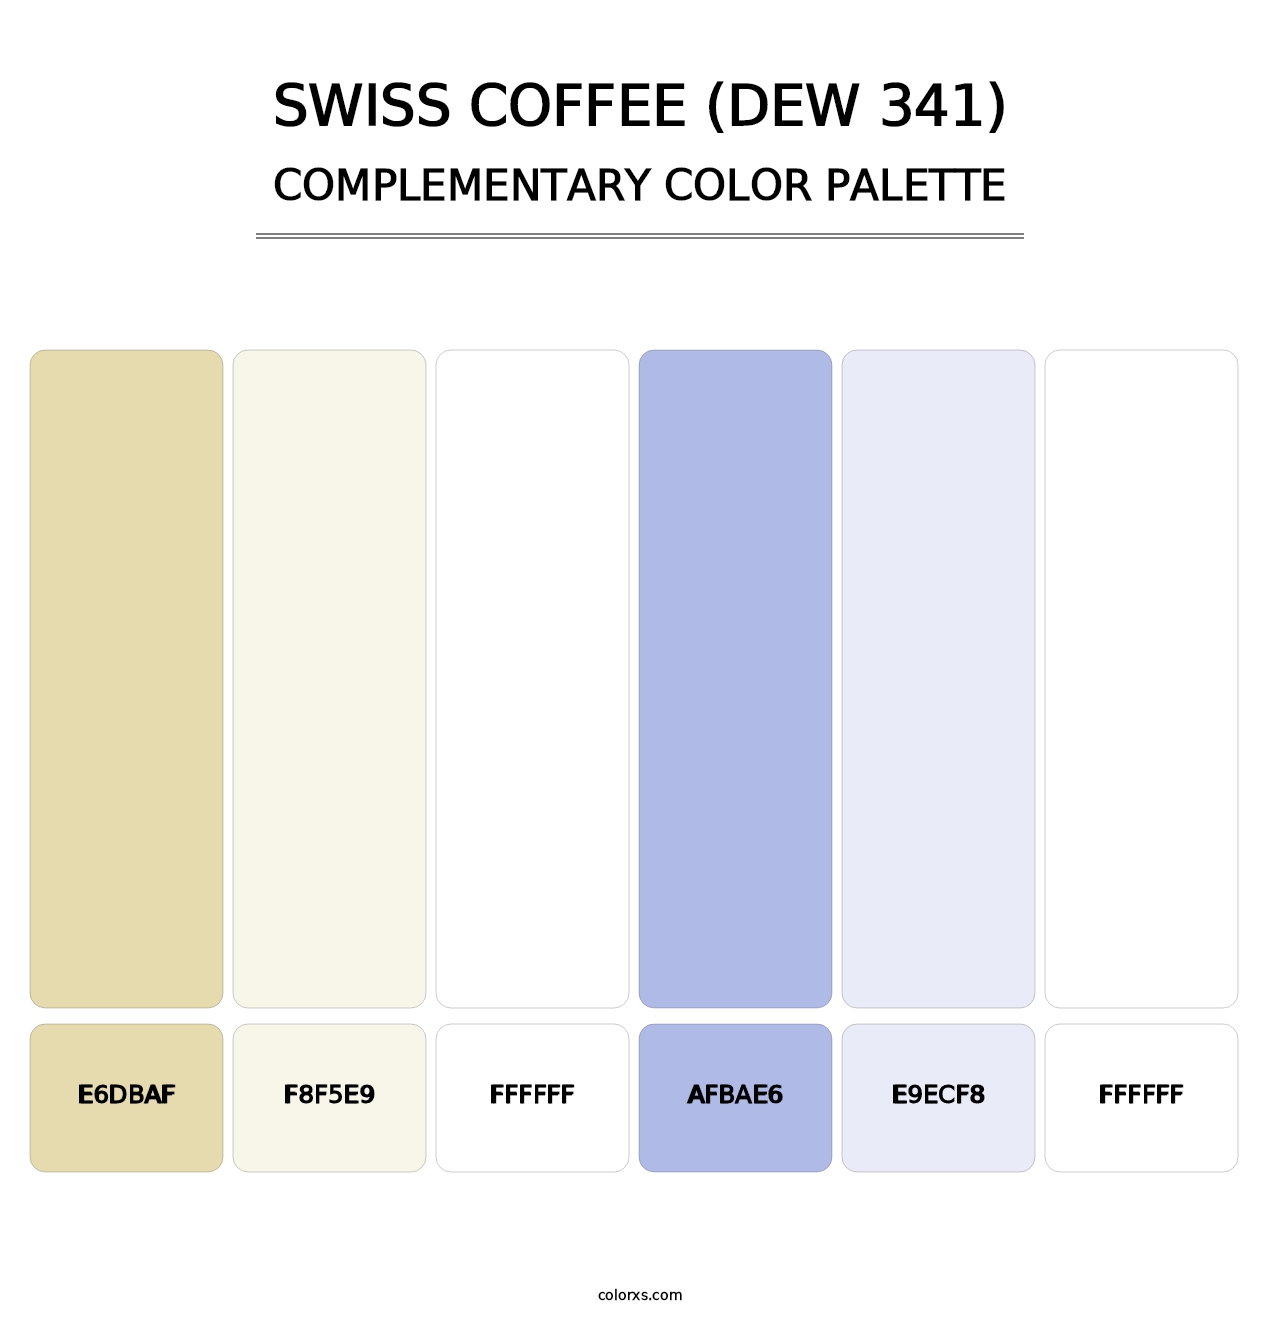 Swiss Coffee (DEW 341) - Complementary Color Palette